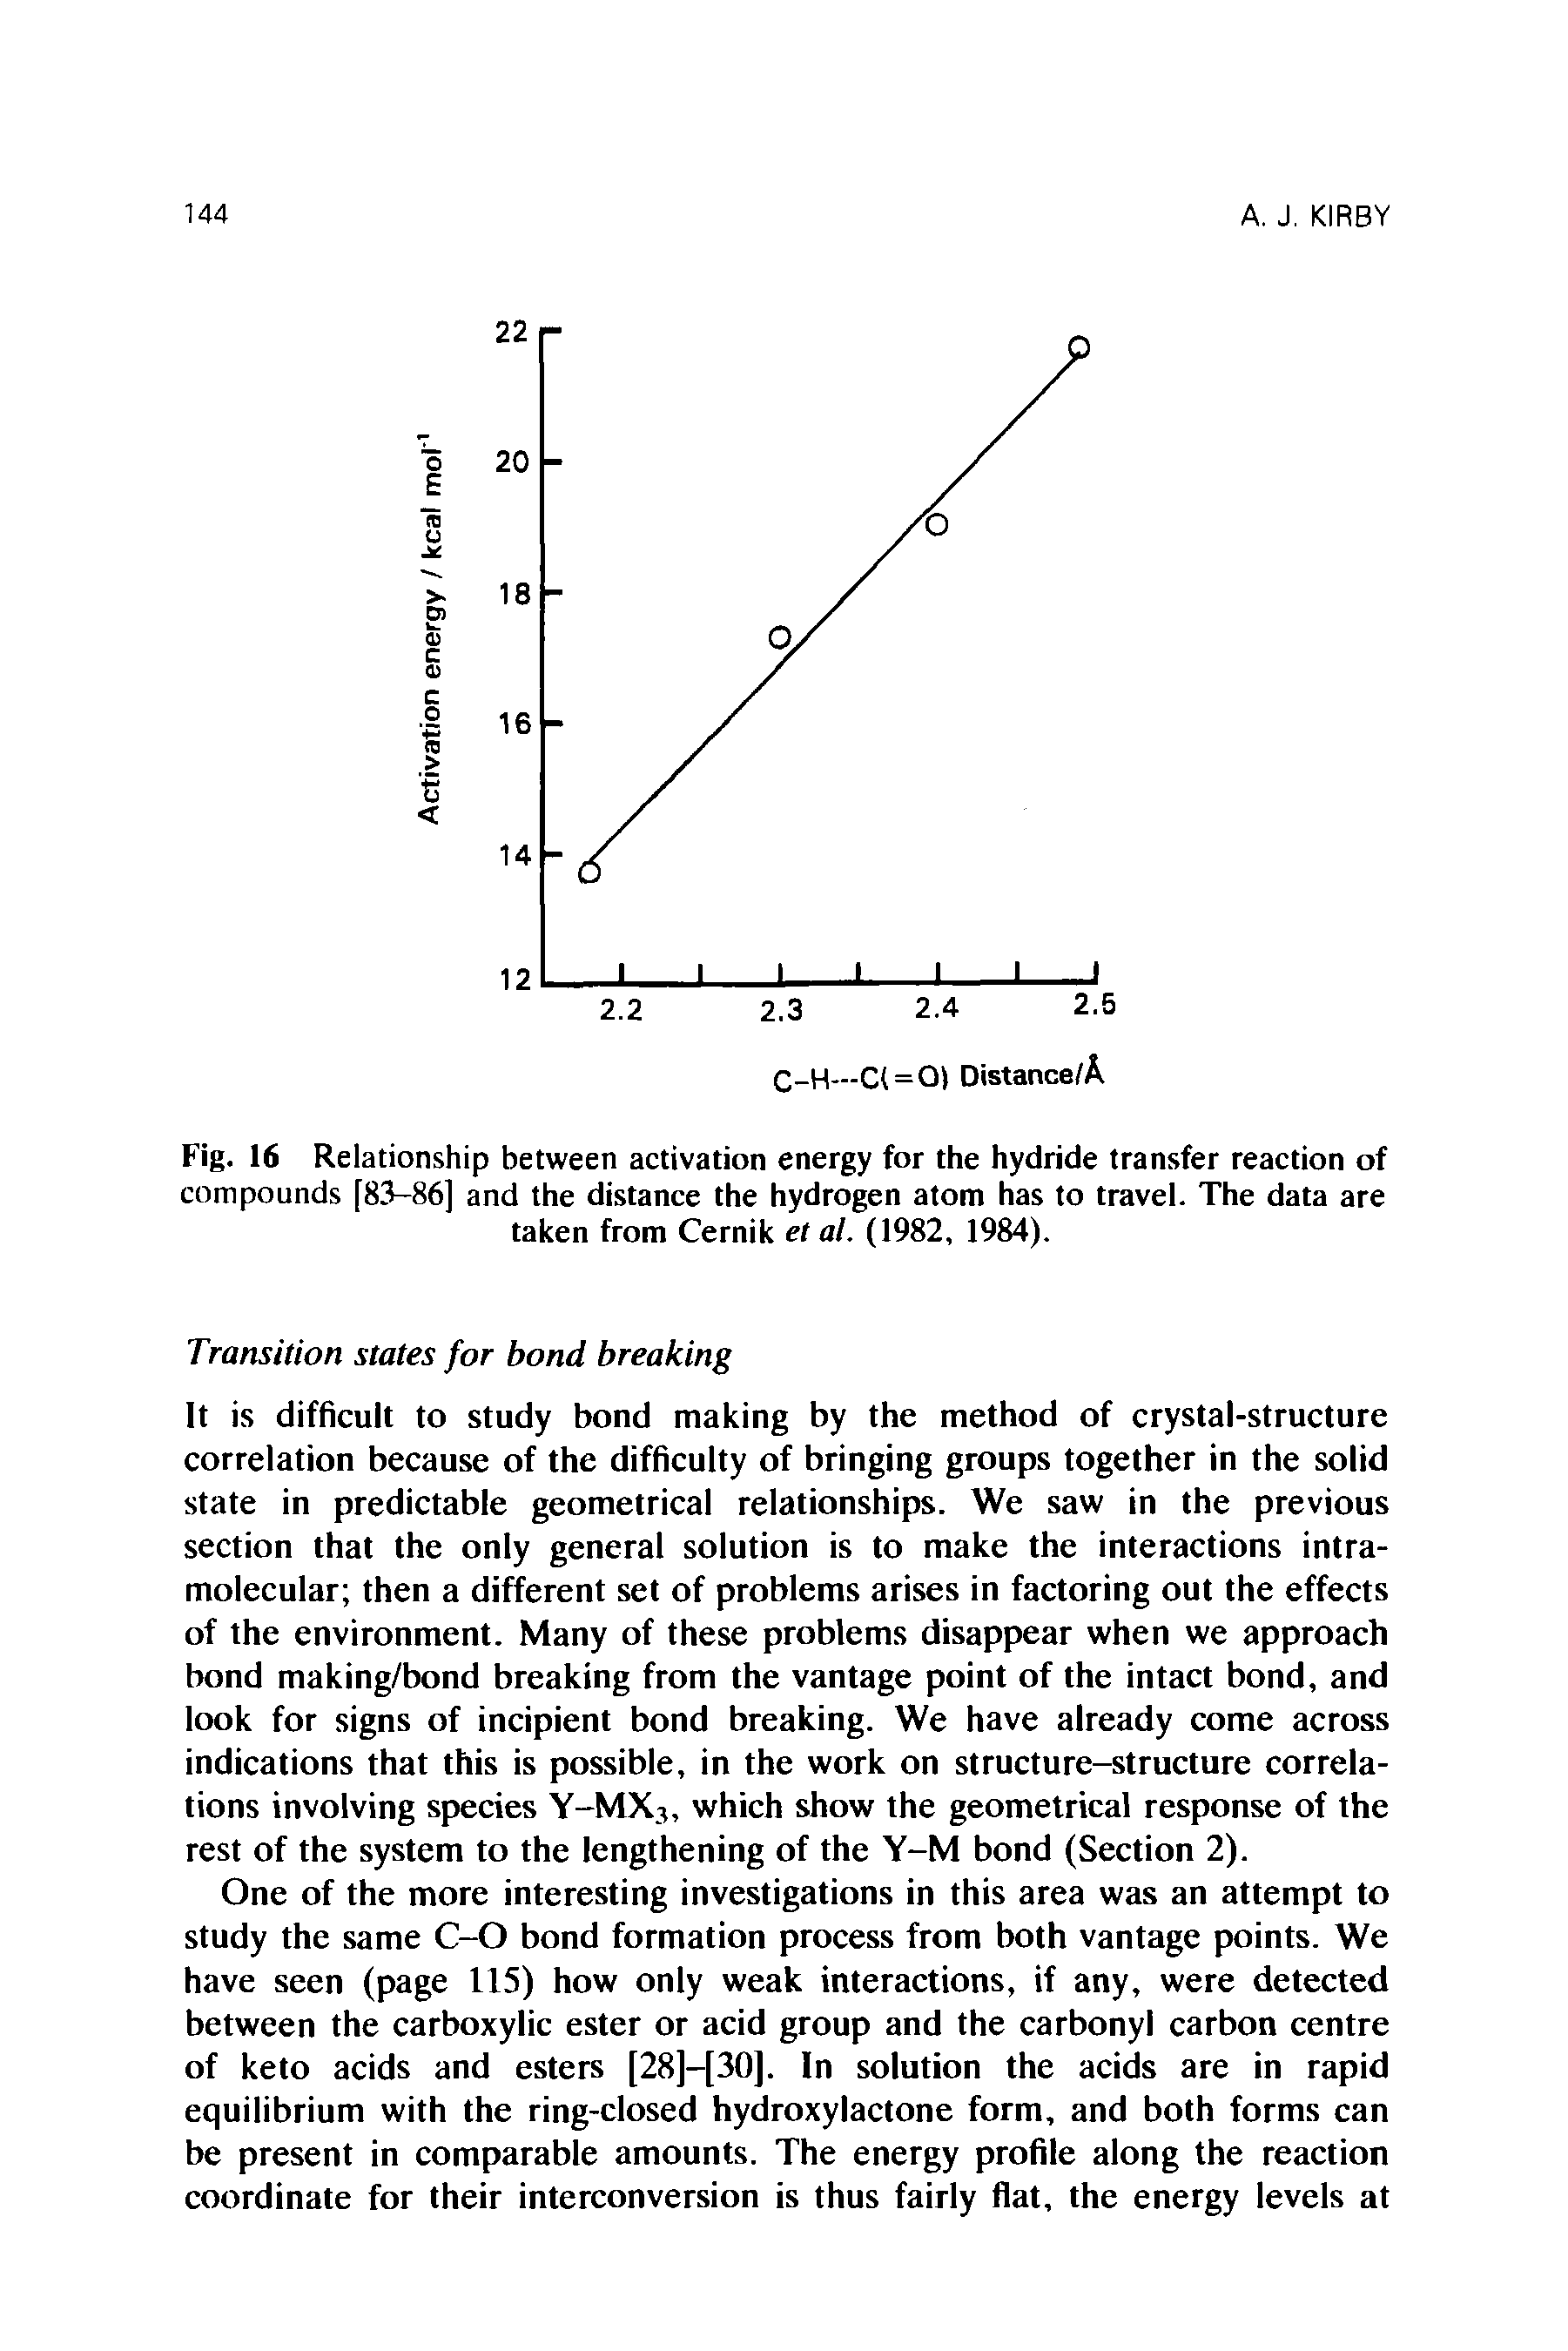 Fig. 16 Relationship between activation energy for the hydride transfer reaction of compounds [83-86] and the distance the hydrogen atom has to travel. The data are taken from Cernik et al. (1982, 1984).